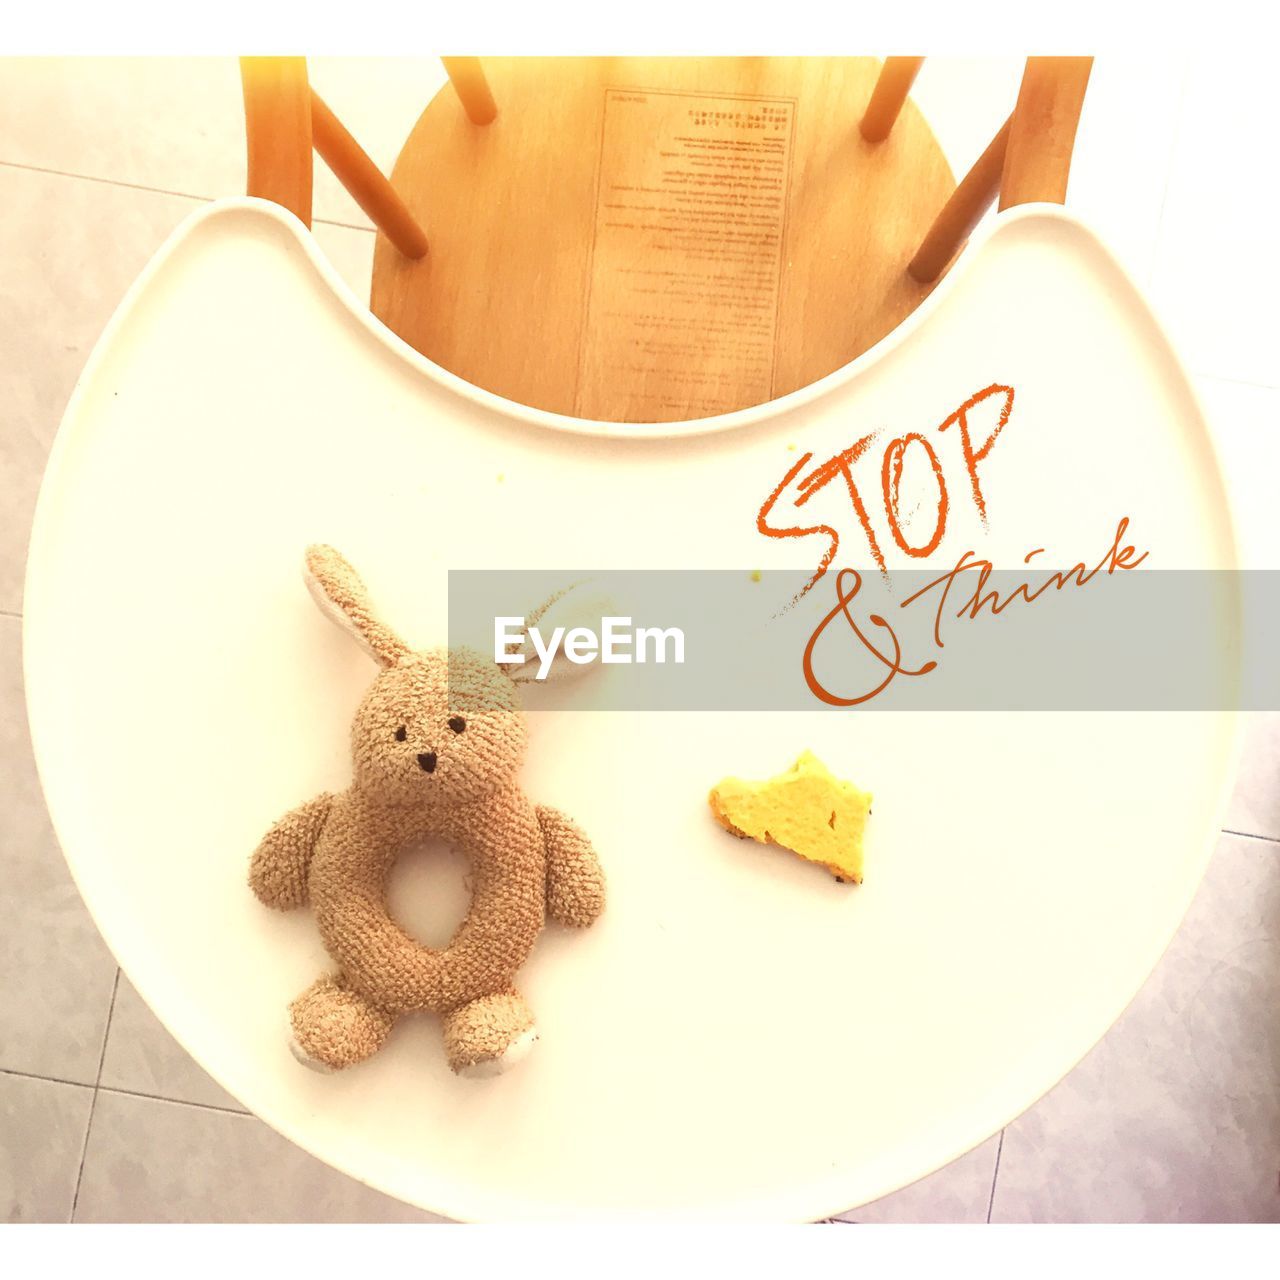 High angle view of stuffed toy on table with text